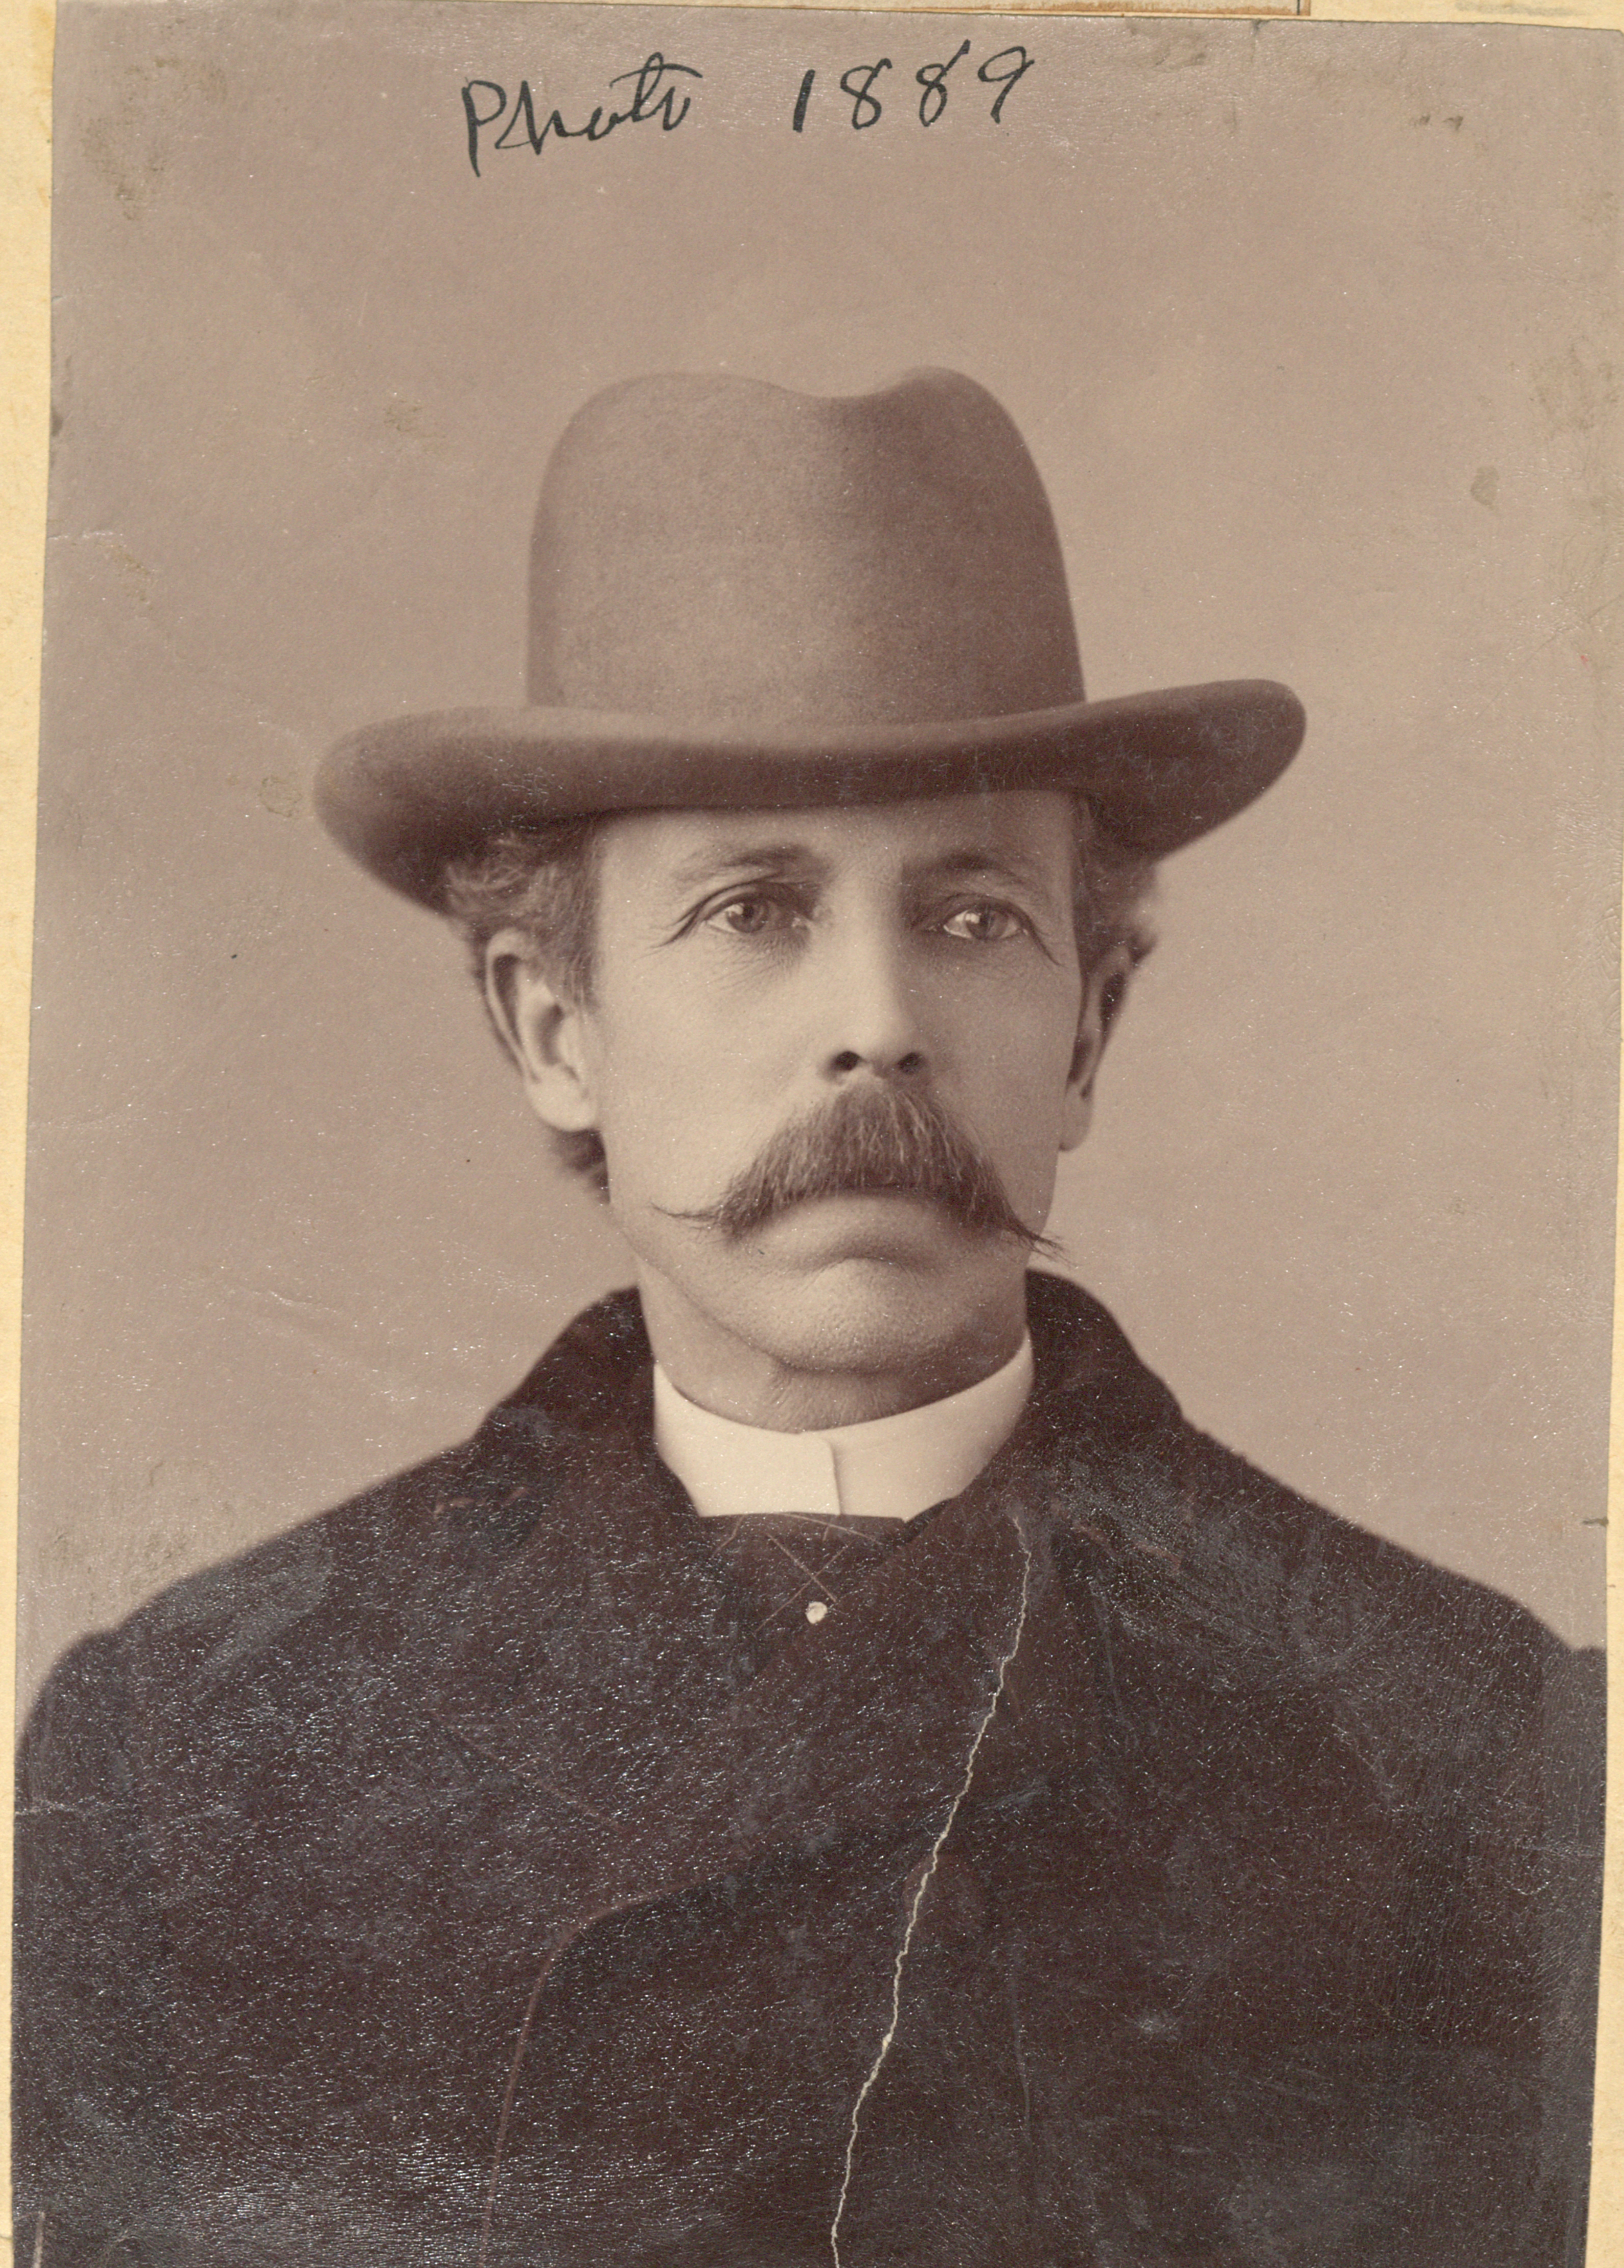 Portrait of Sam Howe with the caption 1889.